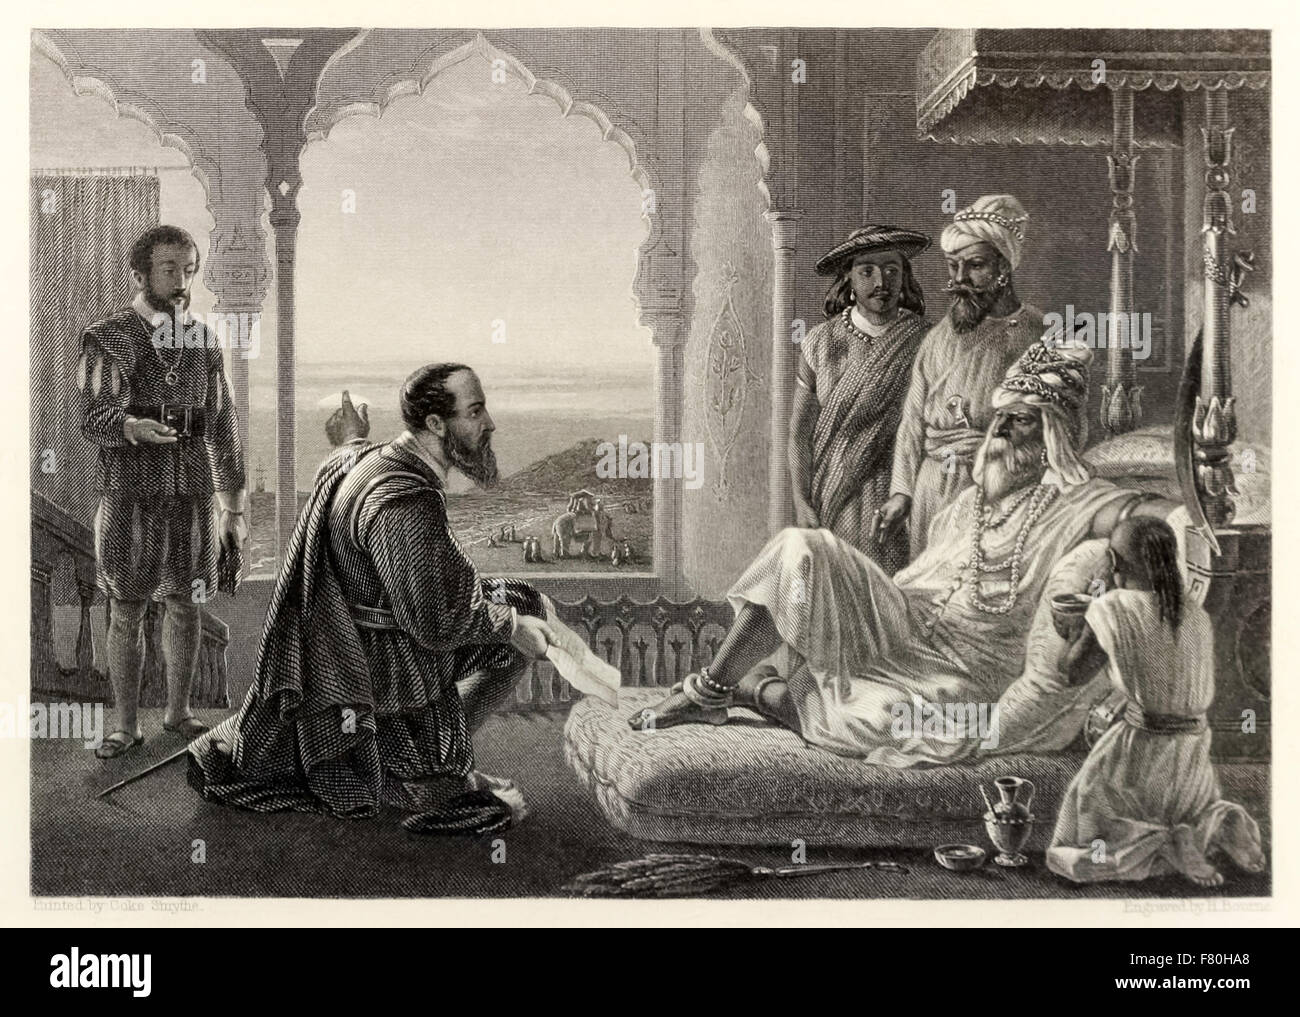 'Vasco da Gama and the Zamorin of Calicut – Opening up of direct European trade with India.’ The Portuguese explorer arrives in Calicut, Kerala in Southern India for the first time in 1498 and is granted an audience before the King of Calicut. See description for more information. Stock Photo